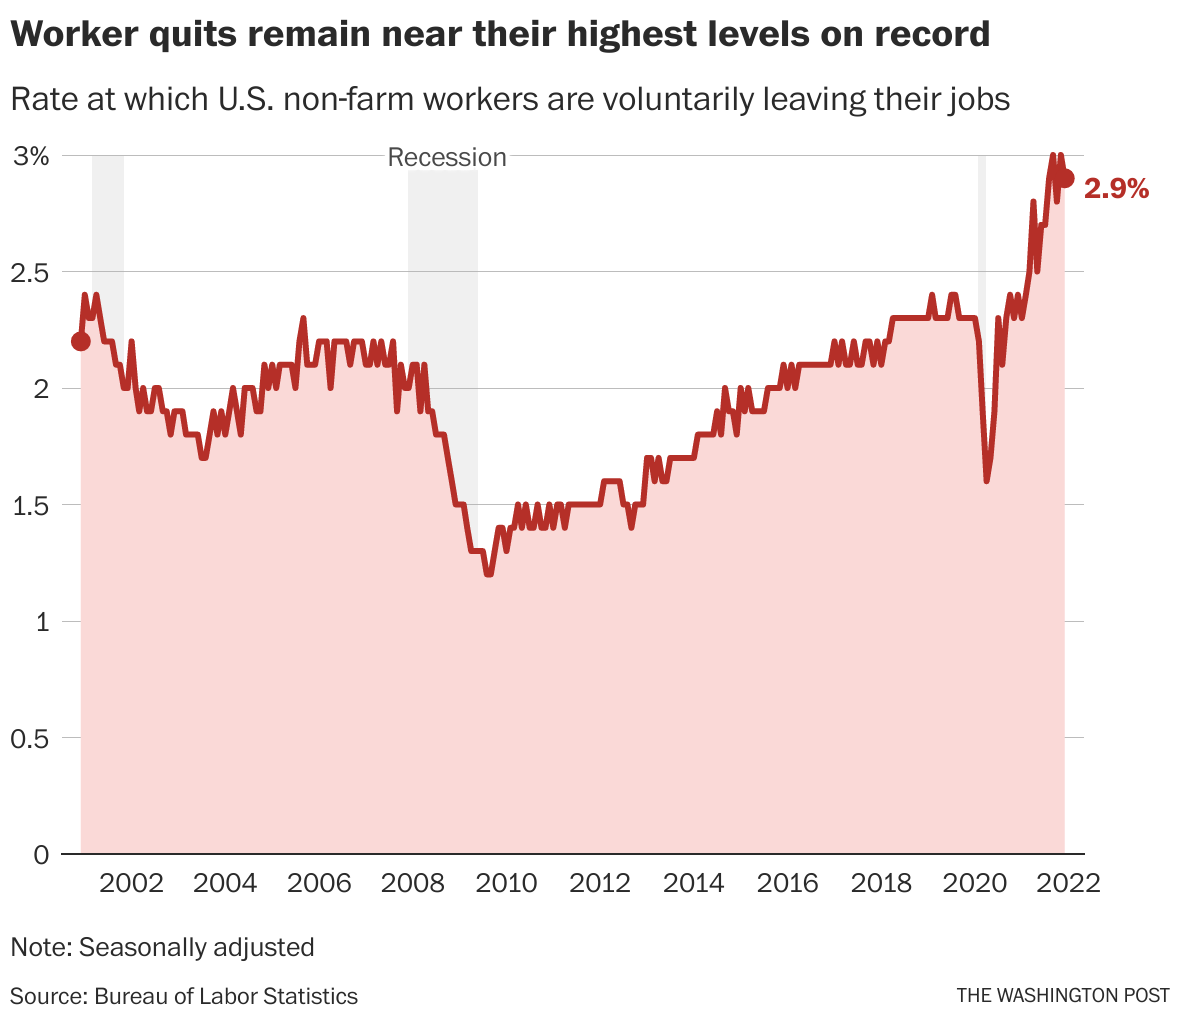 Employees quitting jobs at a high rate